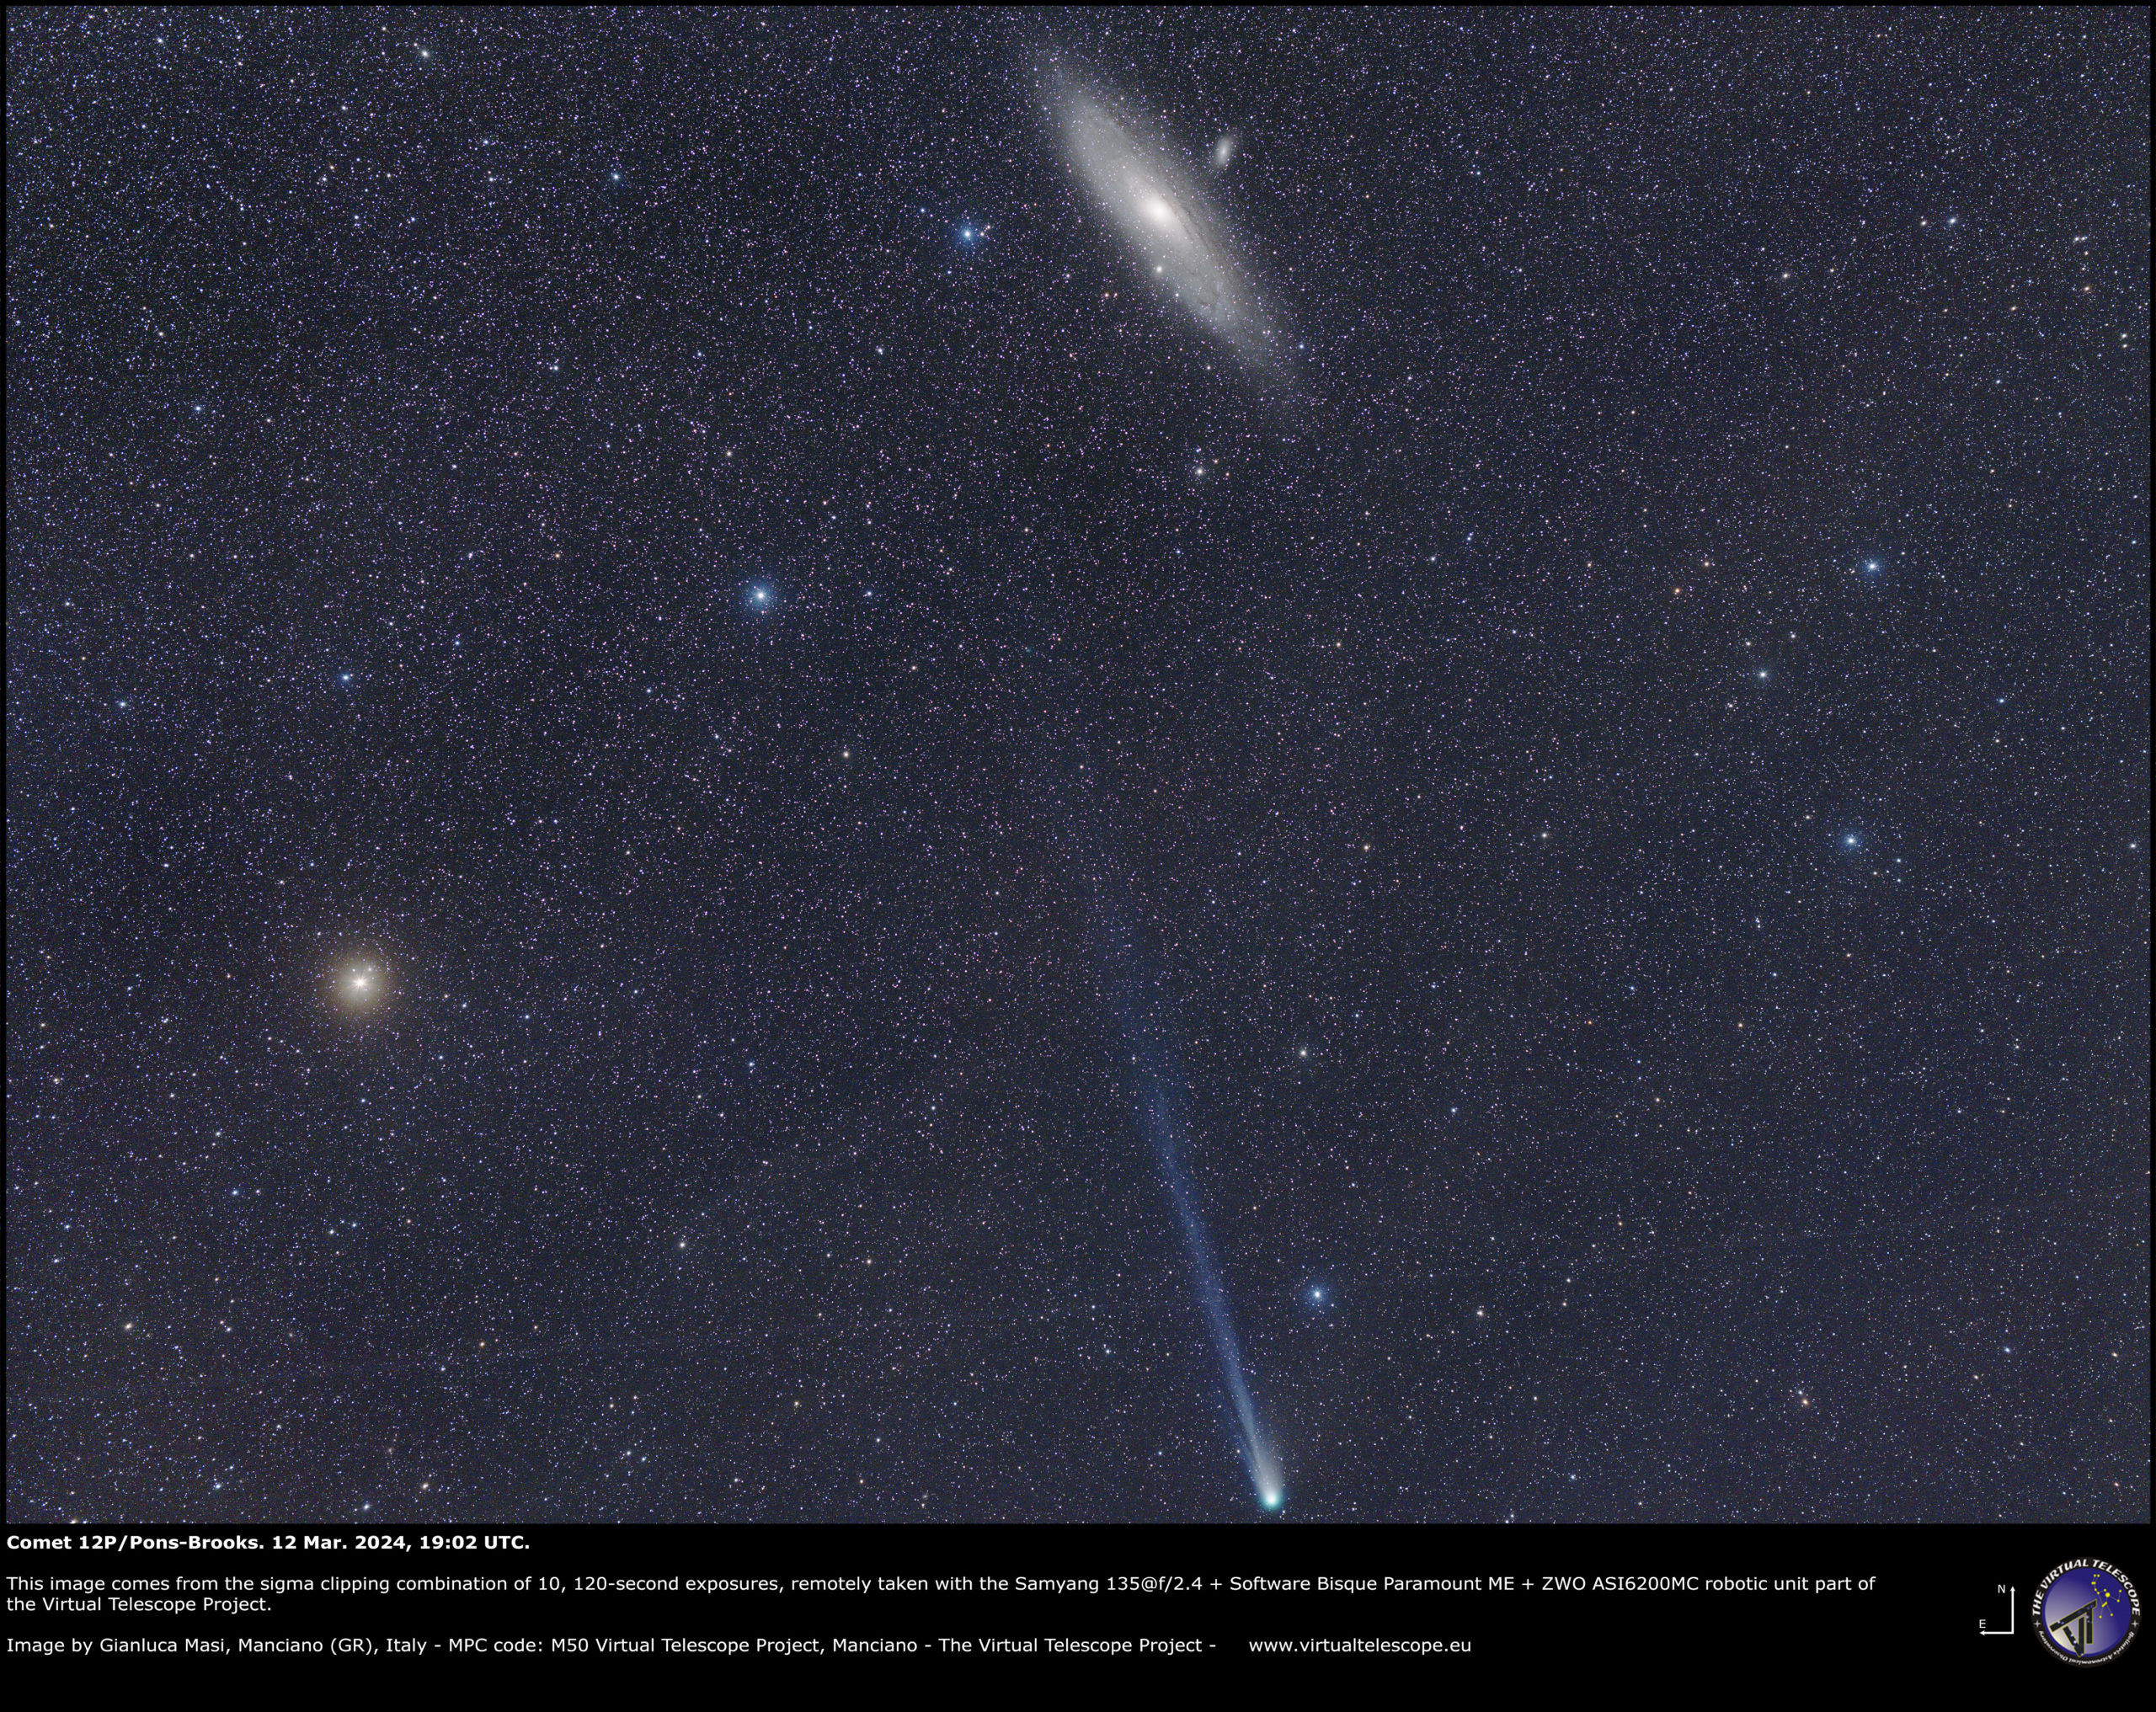 Comet 12P/Pons-Brooks and the great Andromeda Galaxy. 12 Mar. 2024.